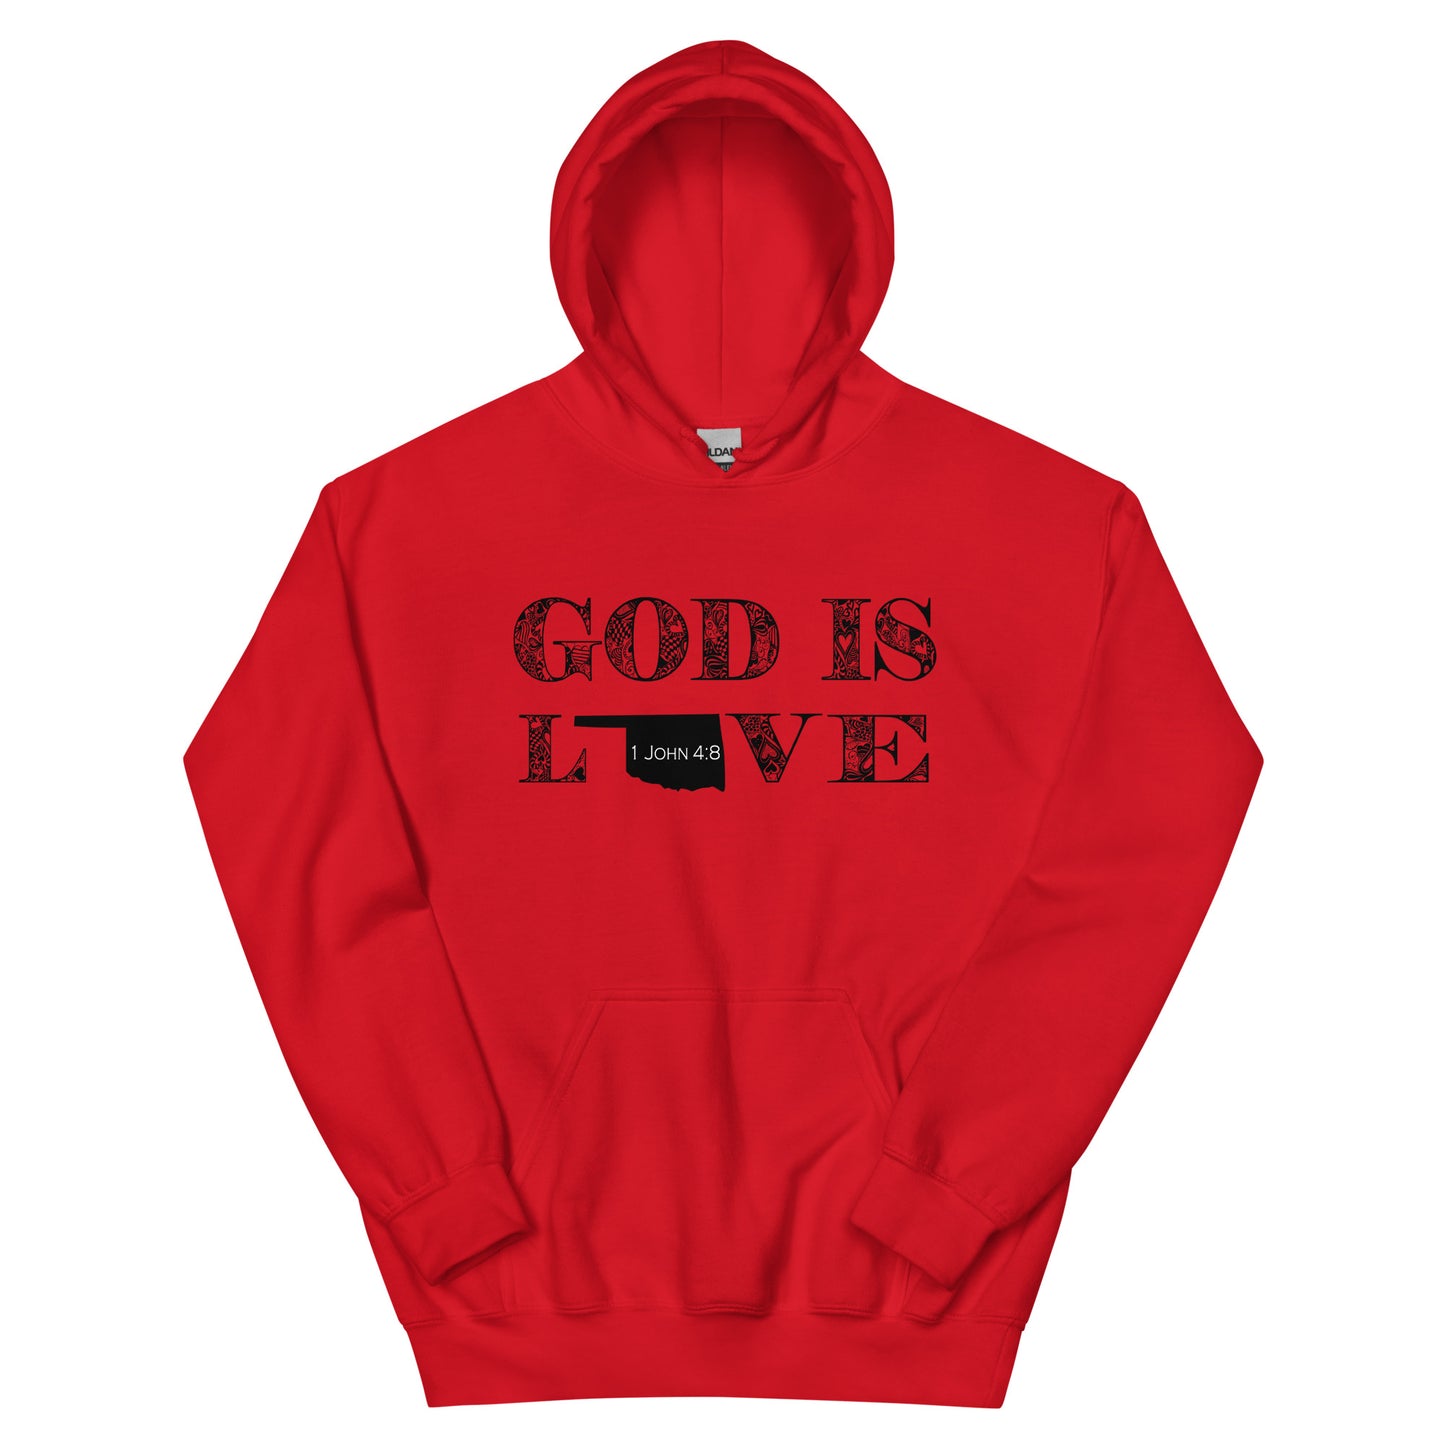 1 John 4:8 God Is Love Unisex Oklahoma Hoodie in Red - front view